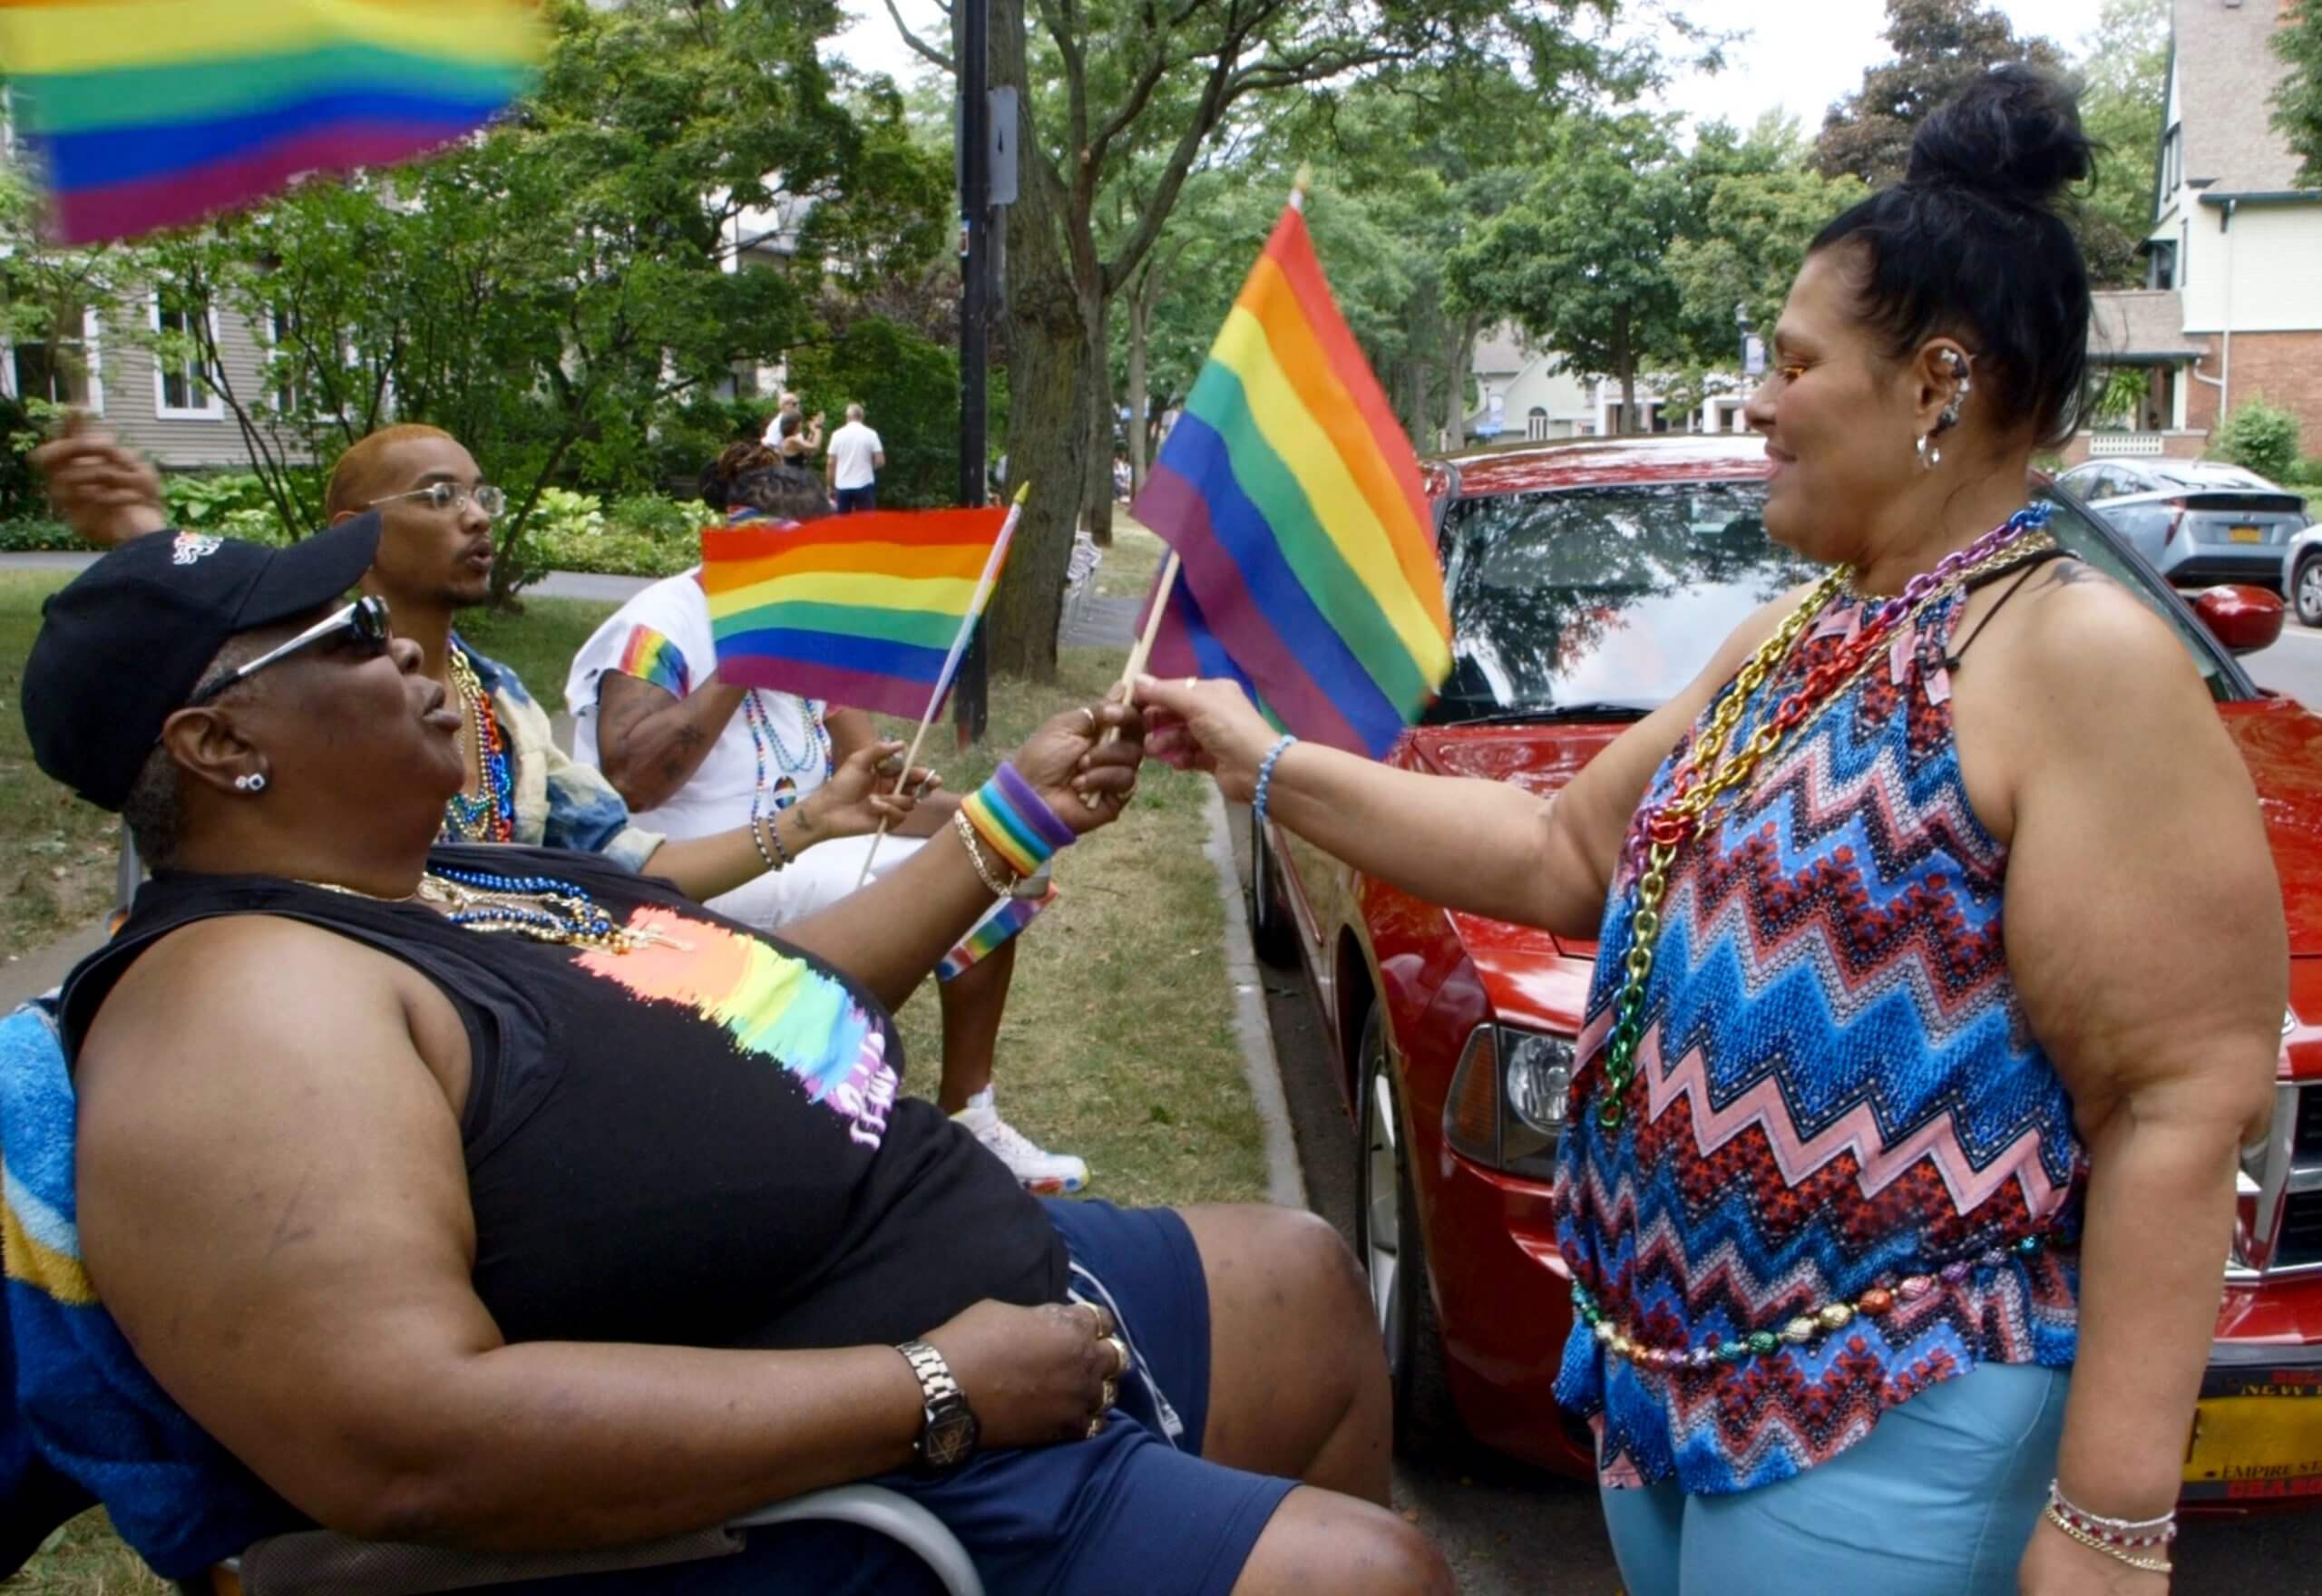 Still from And So I Stayed. Three people are sitting on chairs, holding LGBTQ+ flags, and a woman is standing in front of one of them and grabbing one of the flags. There is a red truck parked.